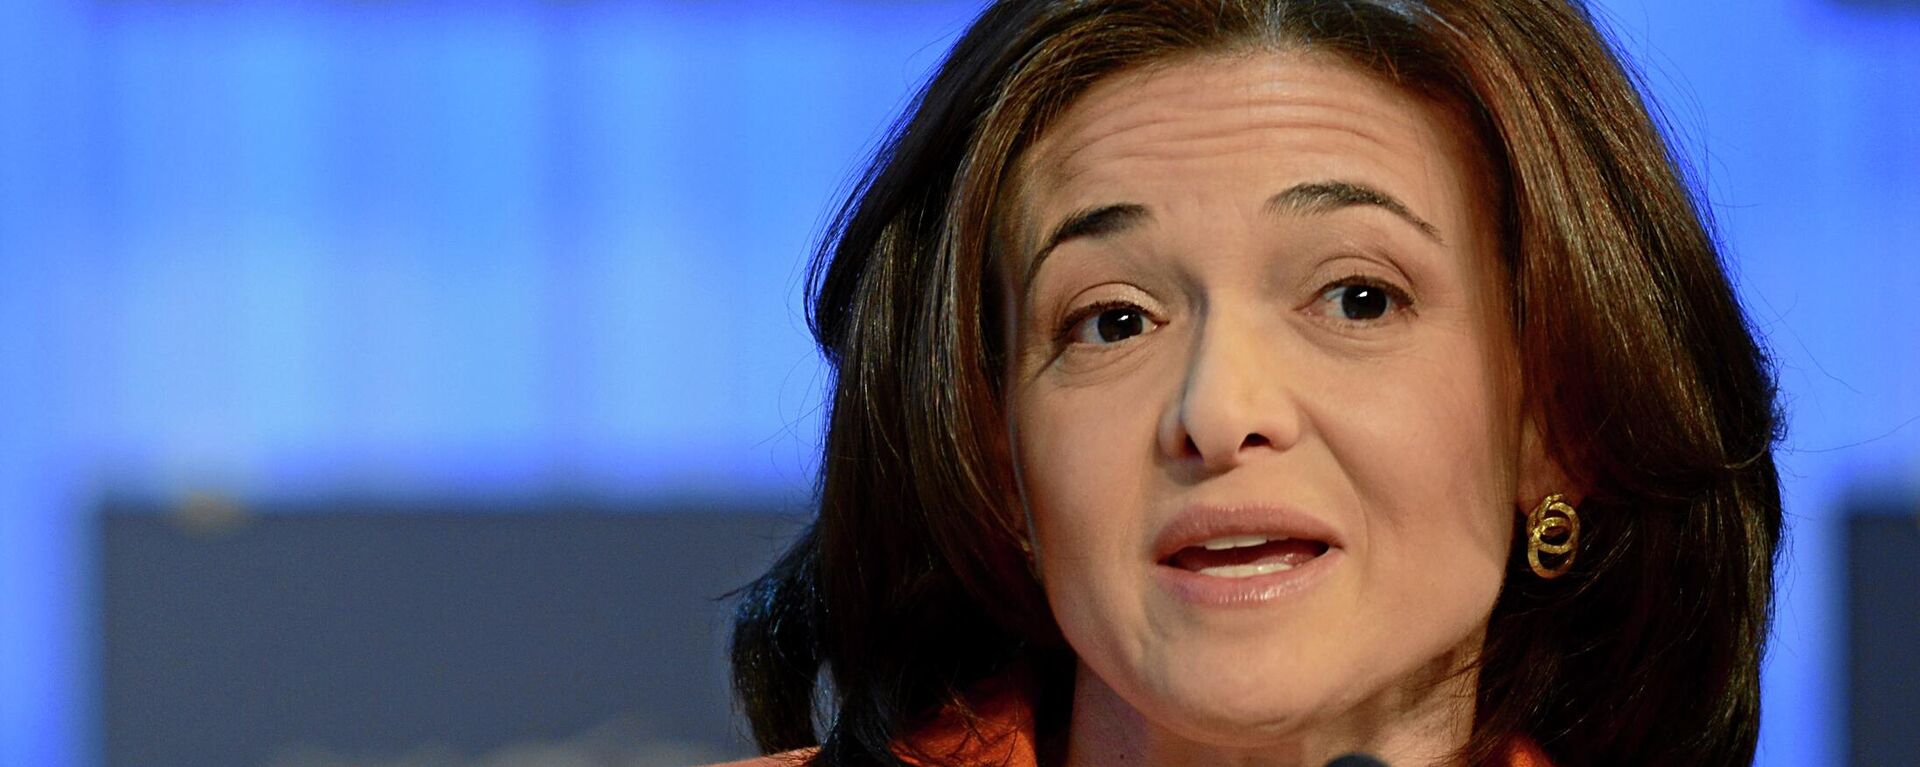 Sheryl Sandberg, Chief Operating Officer and Member of the Board, Facebook, USA; Young Global Leader Alumnus gives a statement during the session 'Women in Economic Decision-making' at the Annual Meeting 2013 of the World Economic Forum in Davos, Switzerland, January 25, 2013.  - Sputnik International, 1920, 01.06.2022